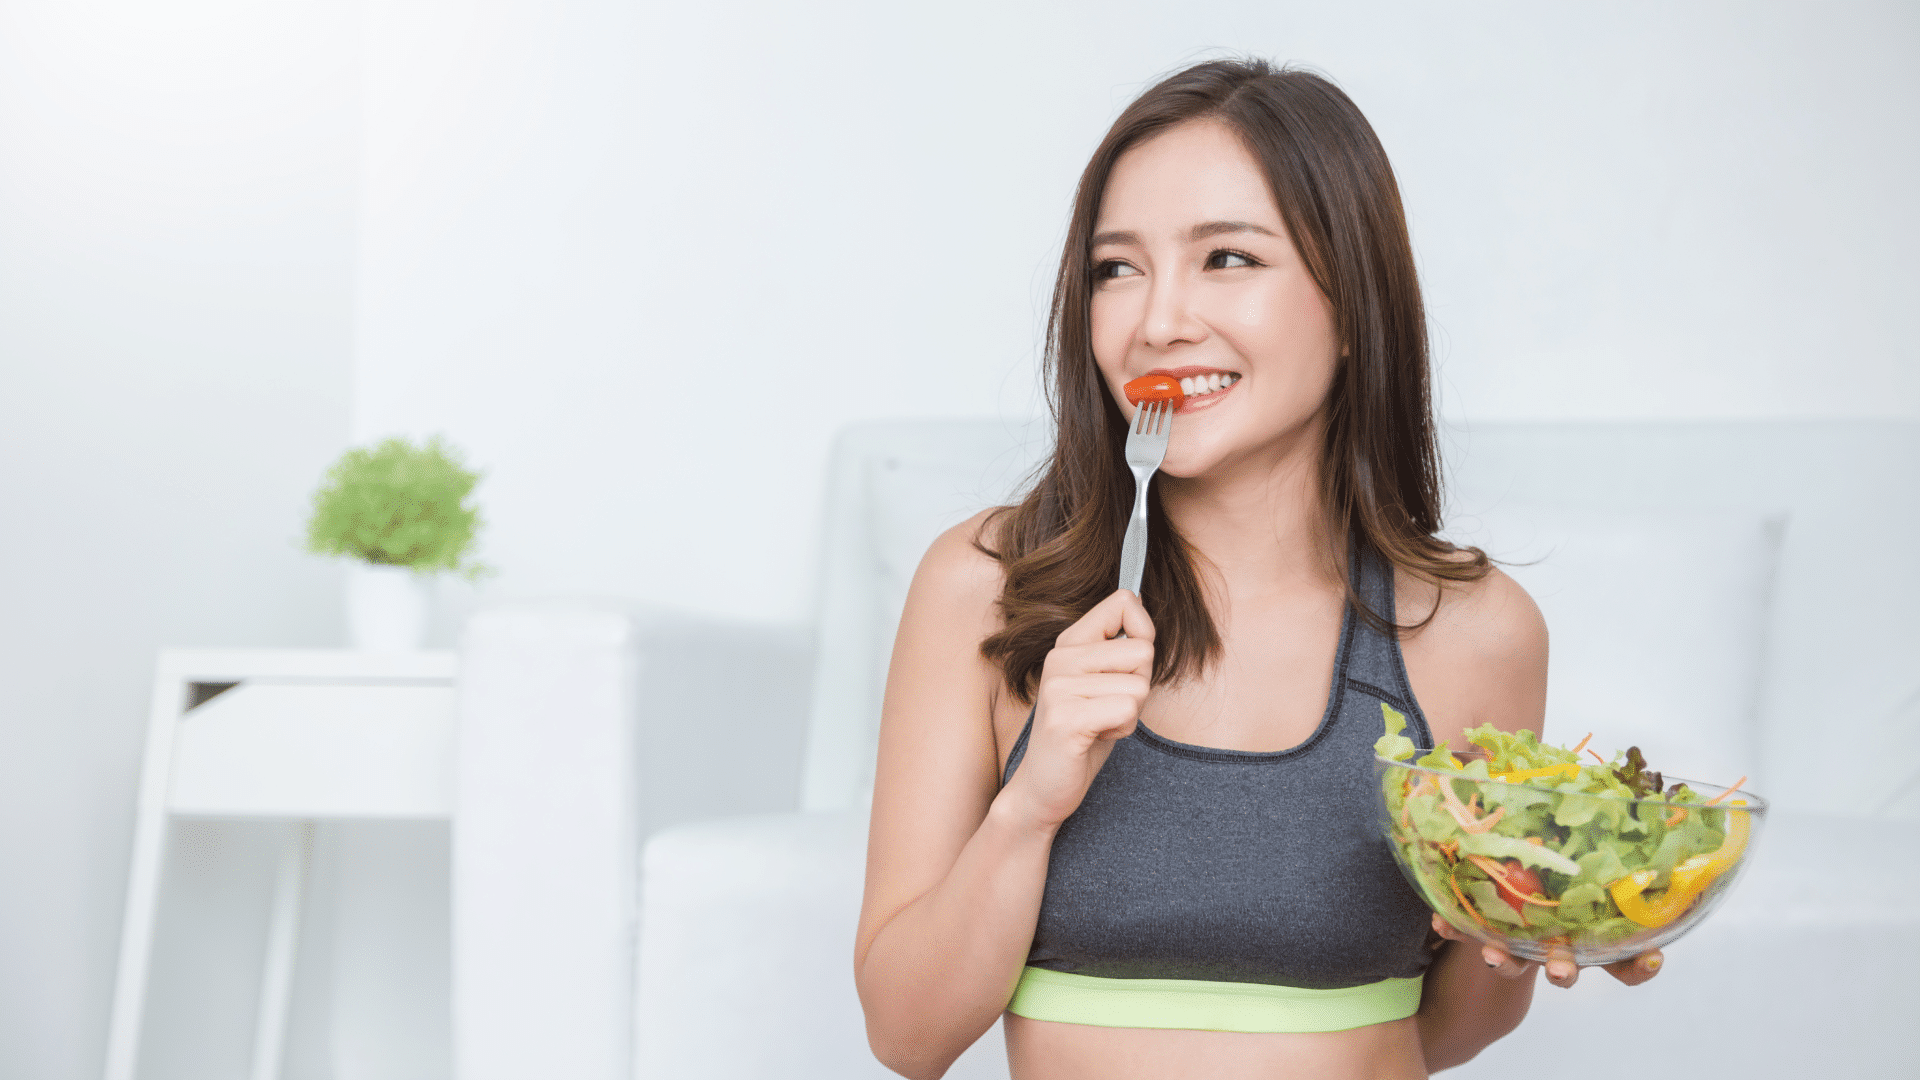 What To Eat Before Workout On Keto Diet To Get The Most Out Of Your WorkOut  Session - BetterMe